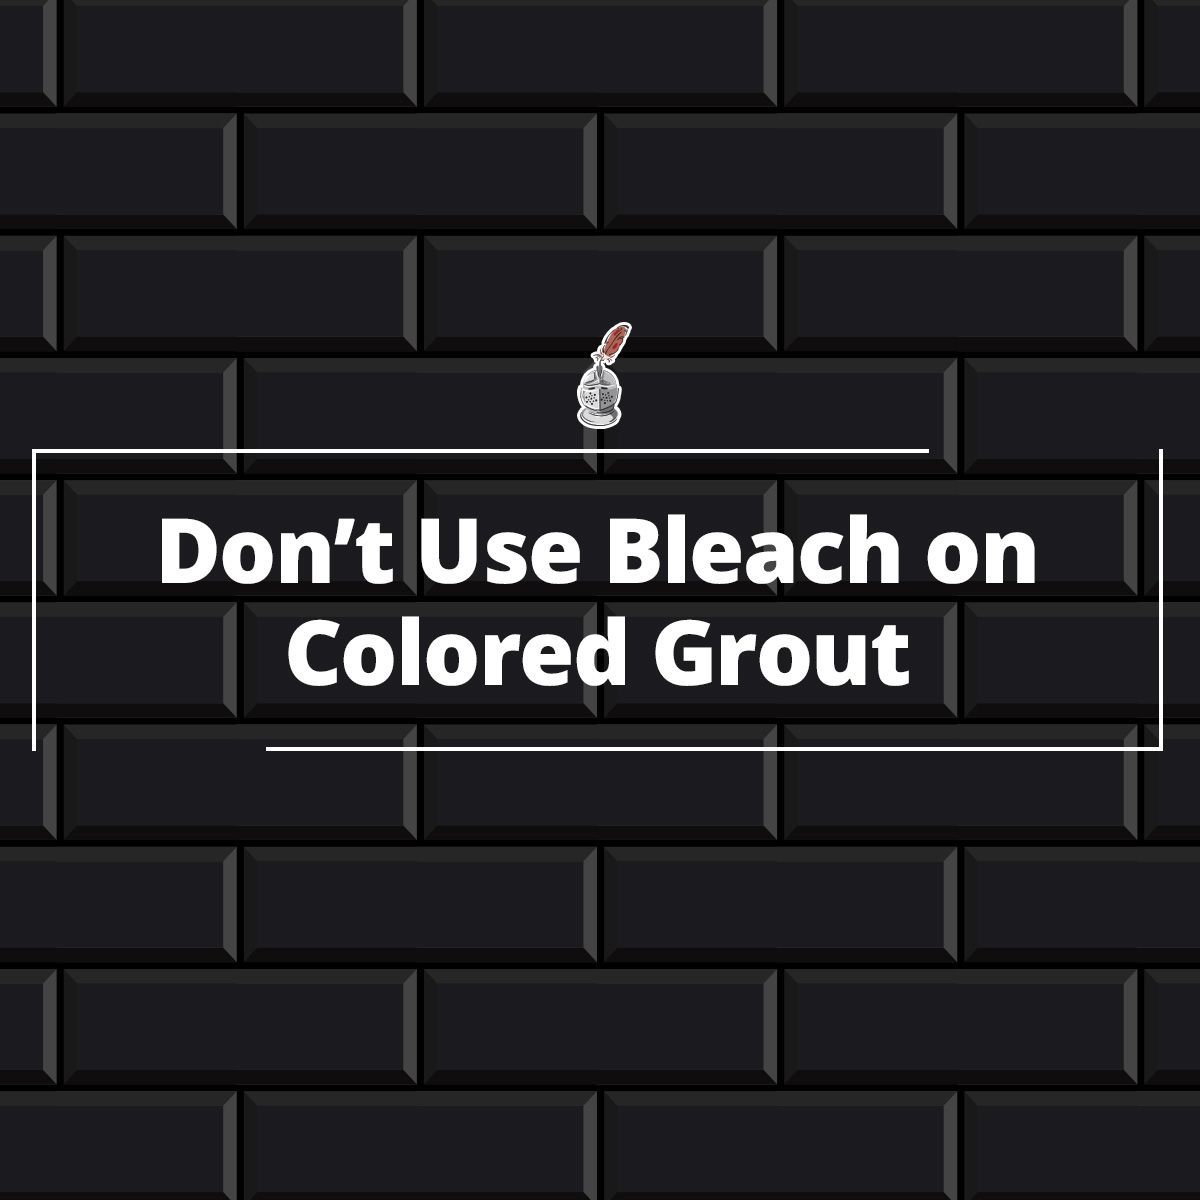 Don't Use Bleach on Colored Grout